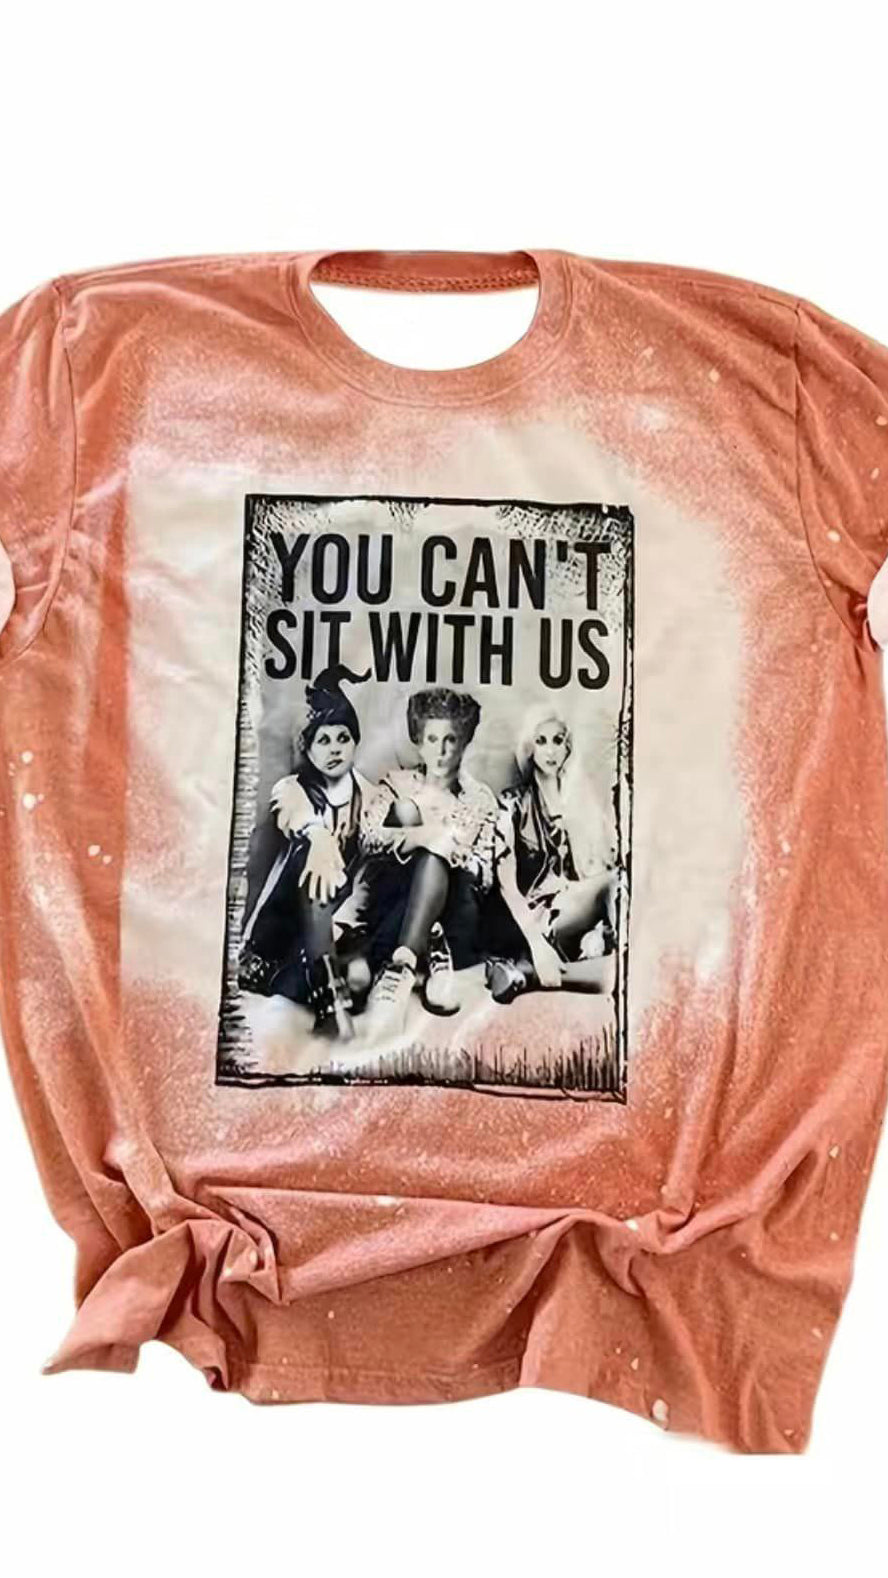 Hocus Pocus "You Can't Sit With Us" T-Shirt